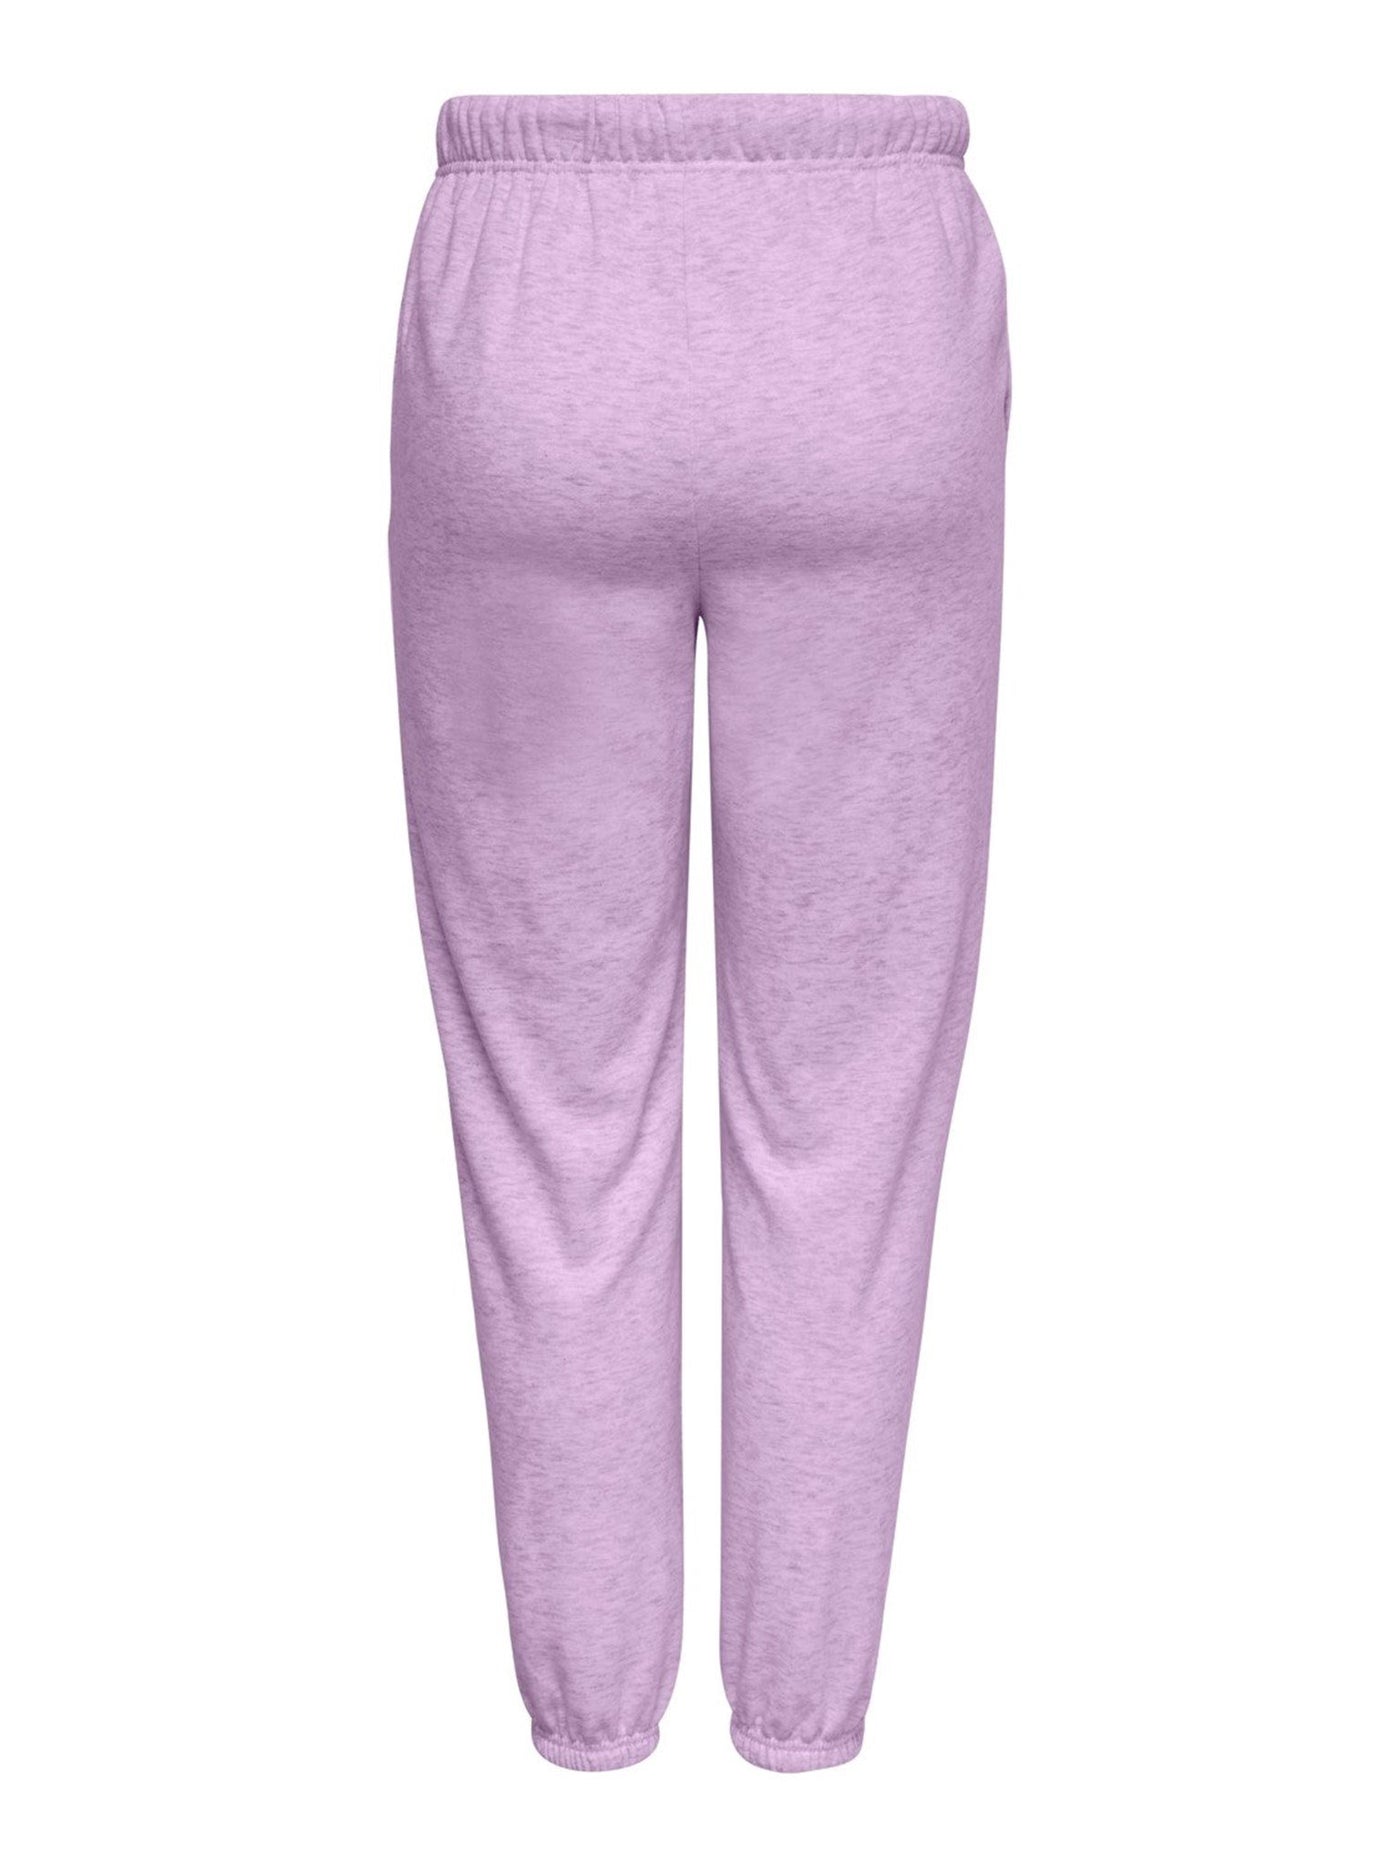 Comfy sweatpants - Orchid Bloom - ONLY - Lyserød 2